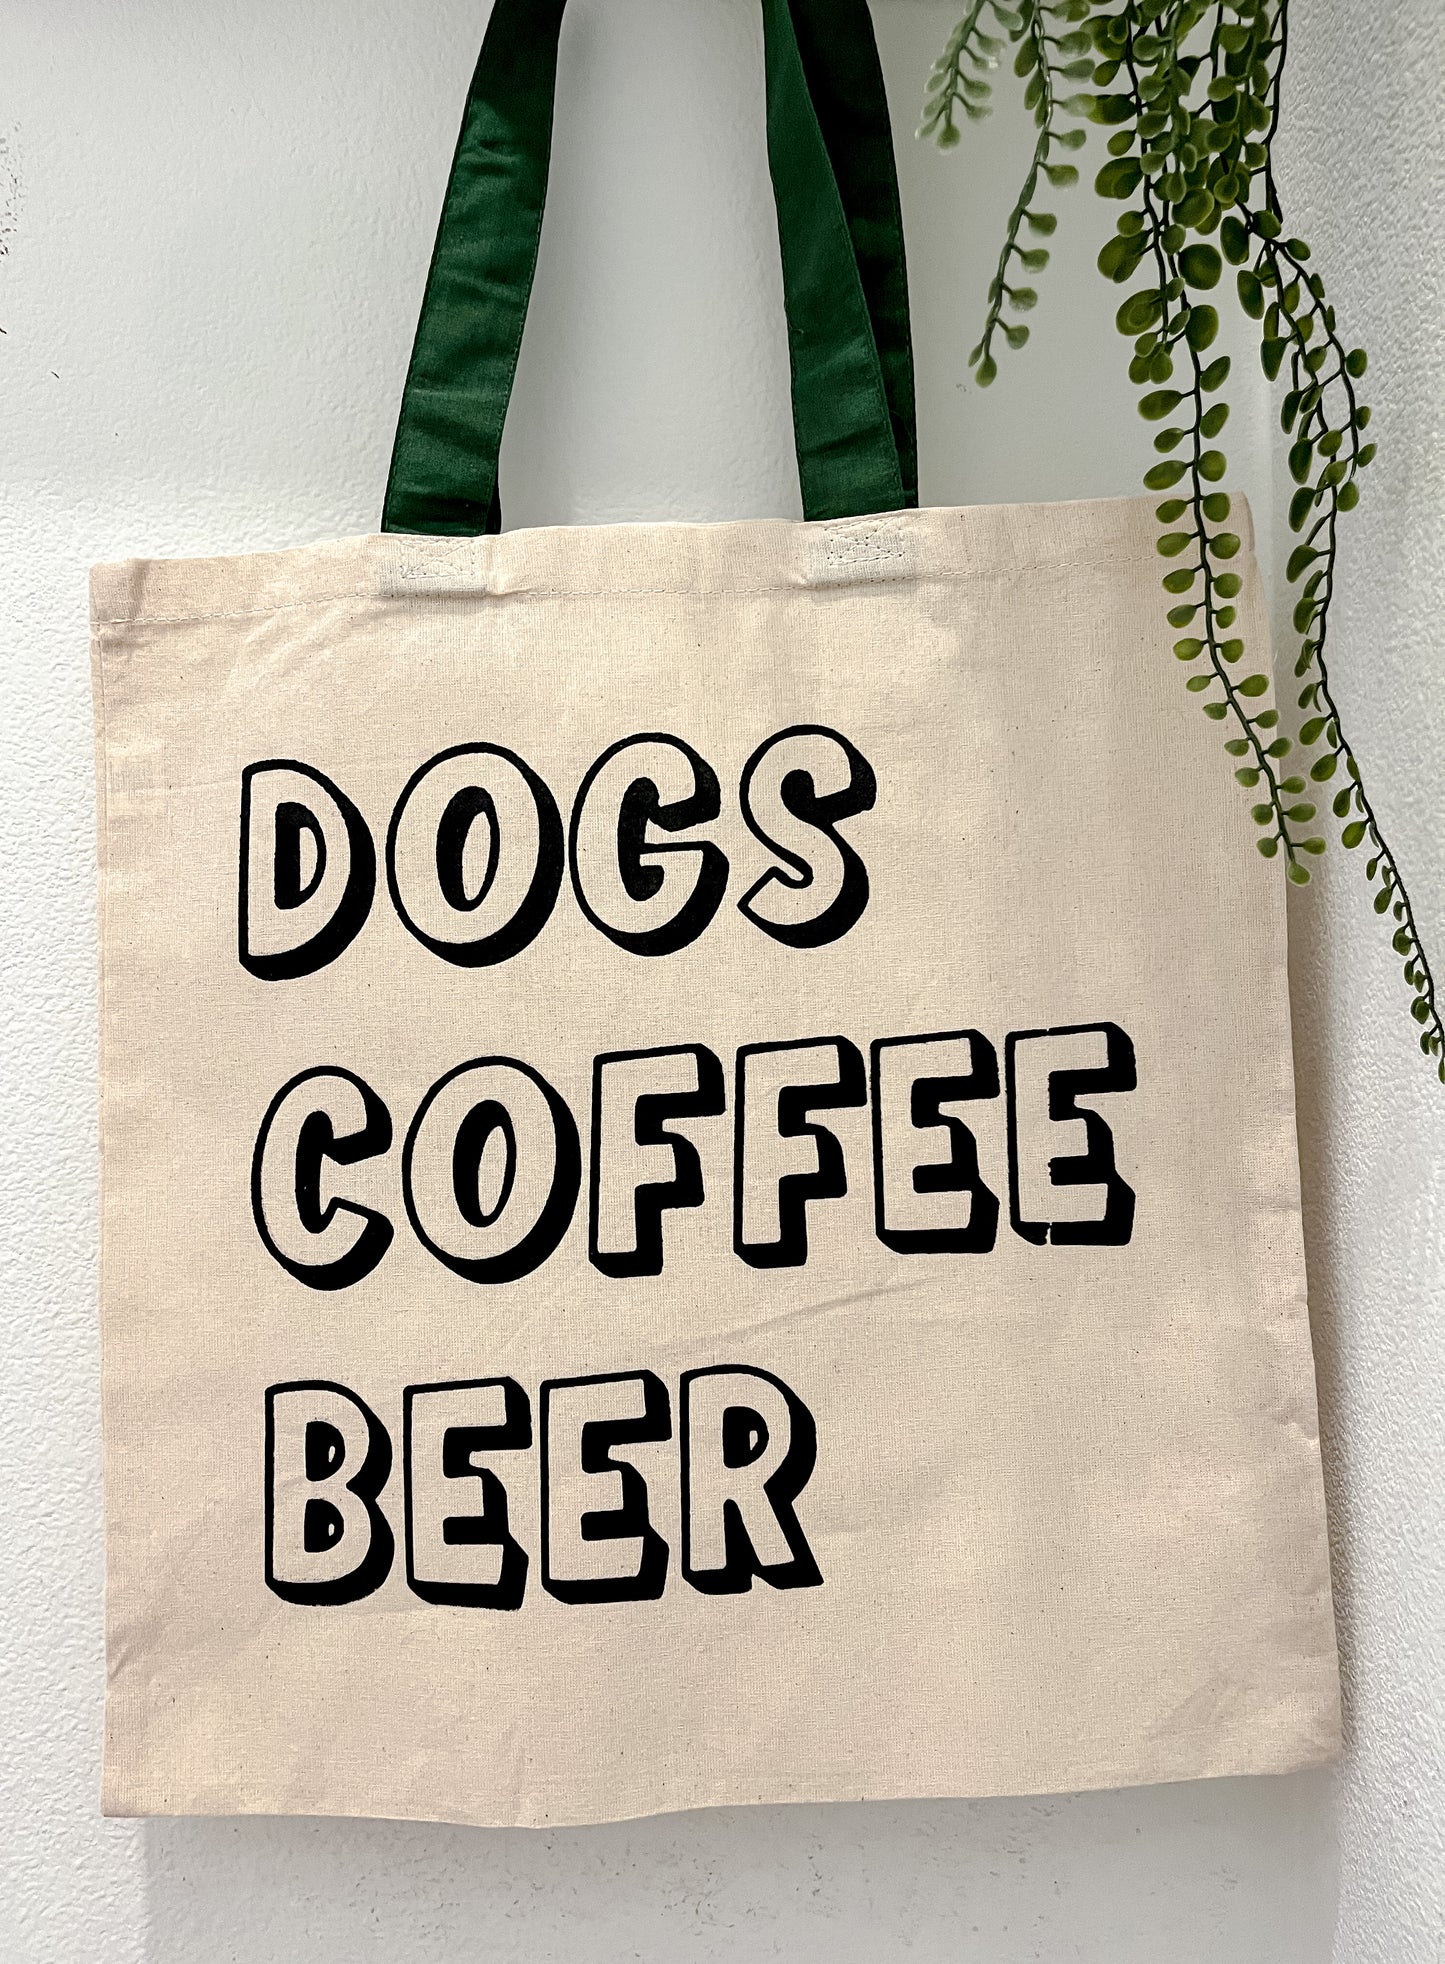 Dogs, Coffee, Beer Tote